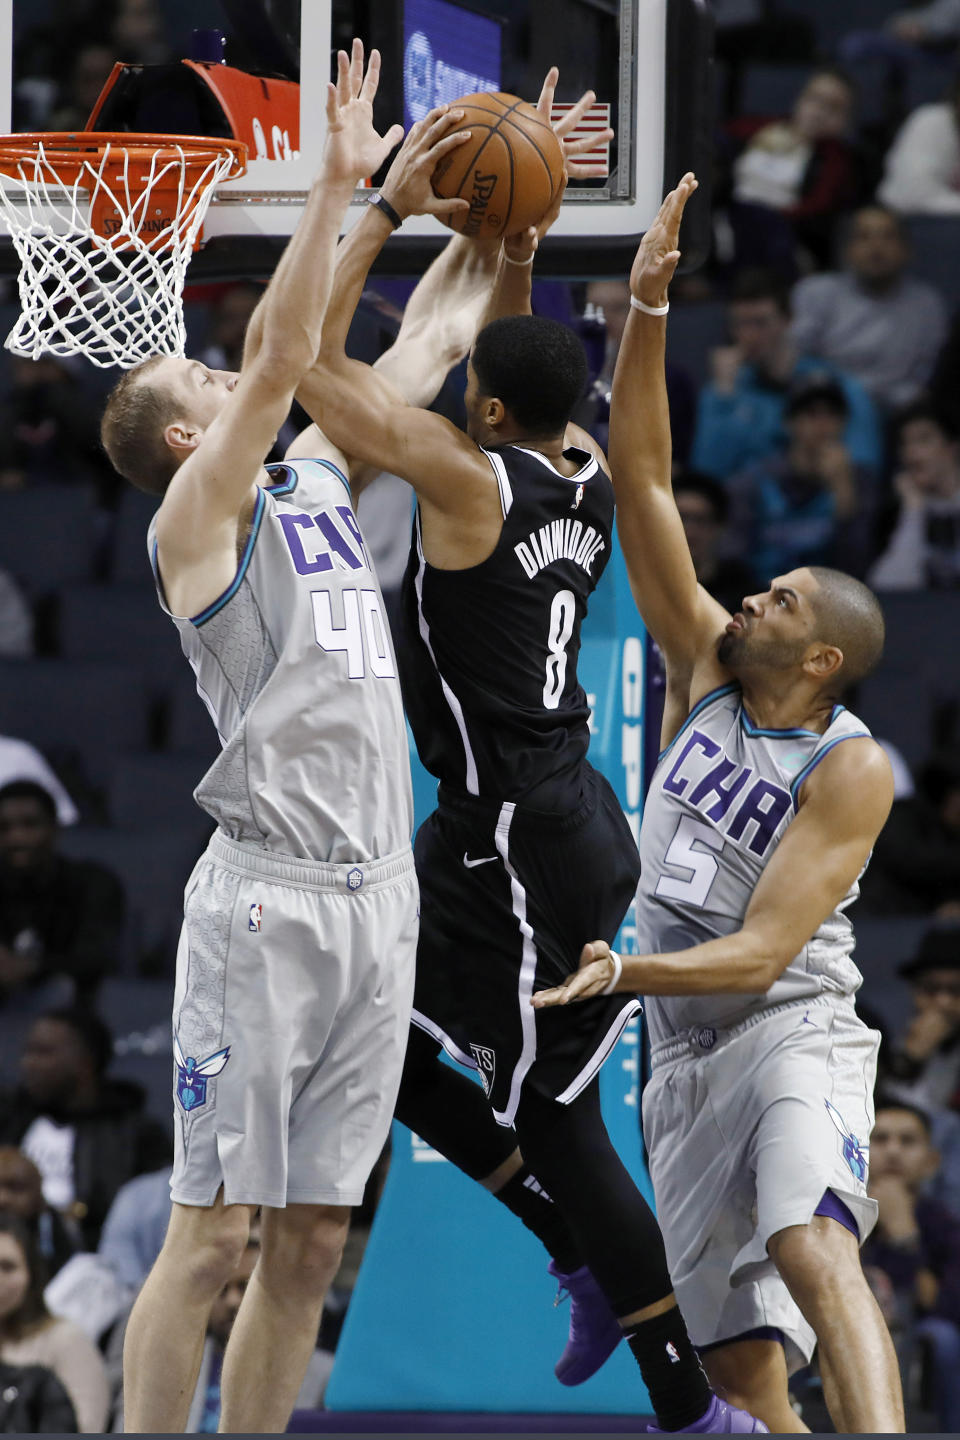 Charlotte Hornets' Cody Zeller (40) and Nicolas Batum (5) team up to try and stop Brooklyn Nets' Spencer Dinwiddie (8) on his way to the basket during the second half of an NBA basketball game in Charlotte, N.C., Friday, Dec. 6, 2019. The Nets won 111-104. (AP Photo/Bob Leverone)